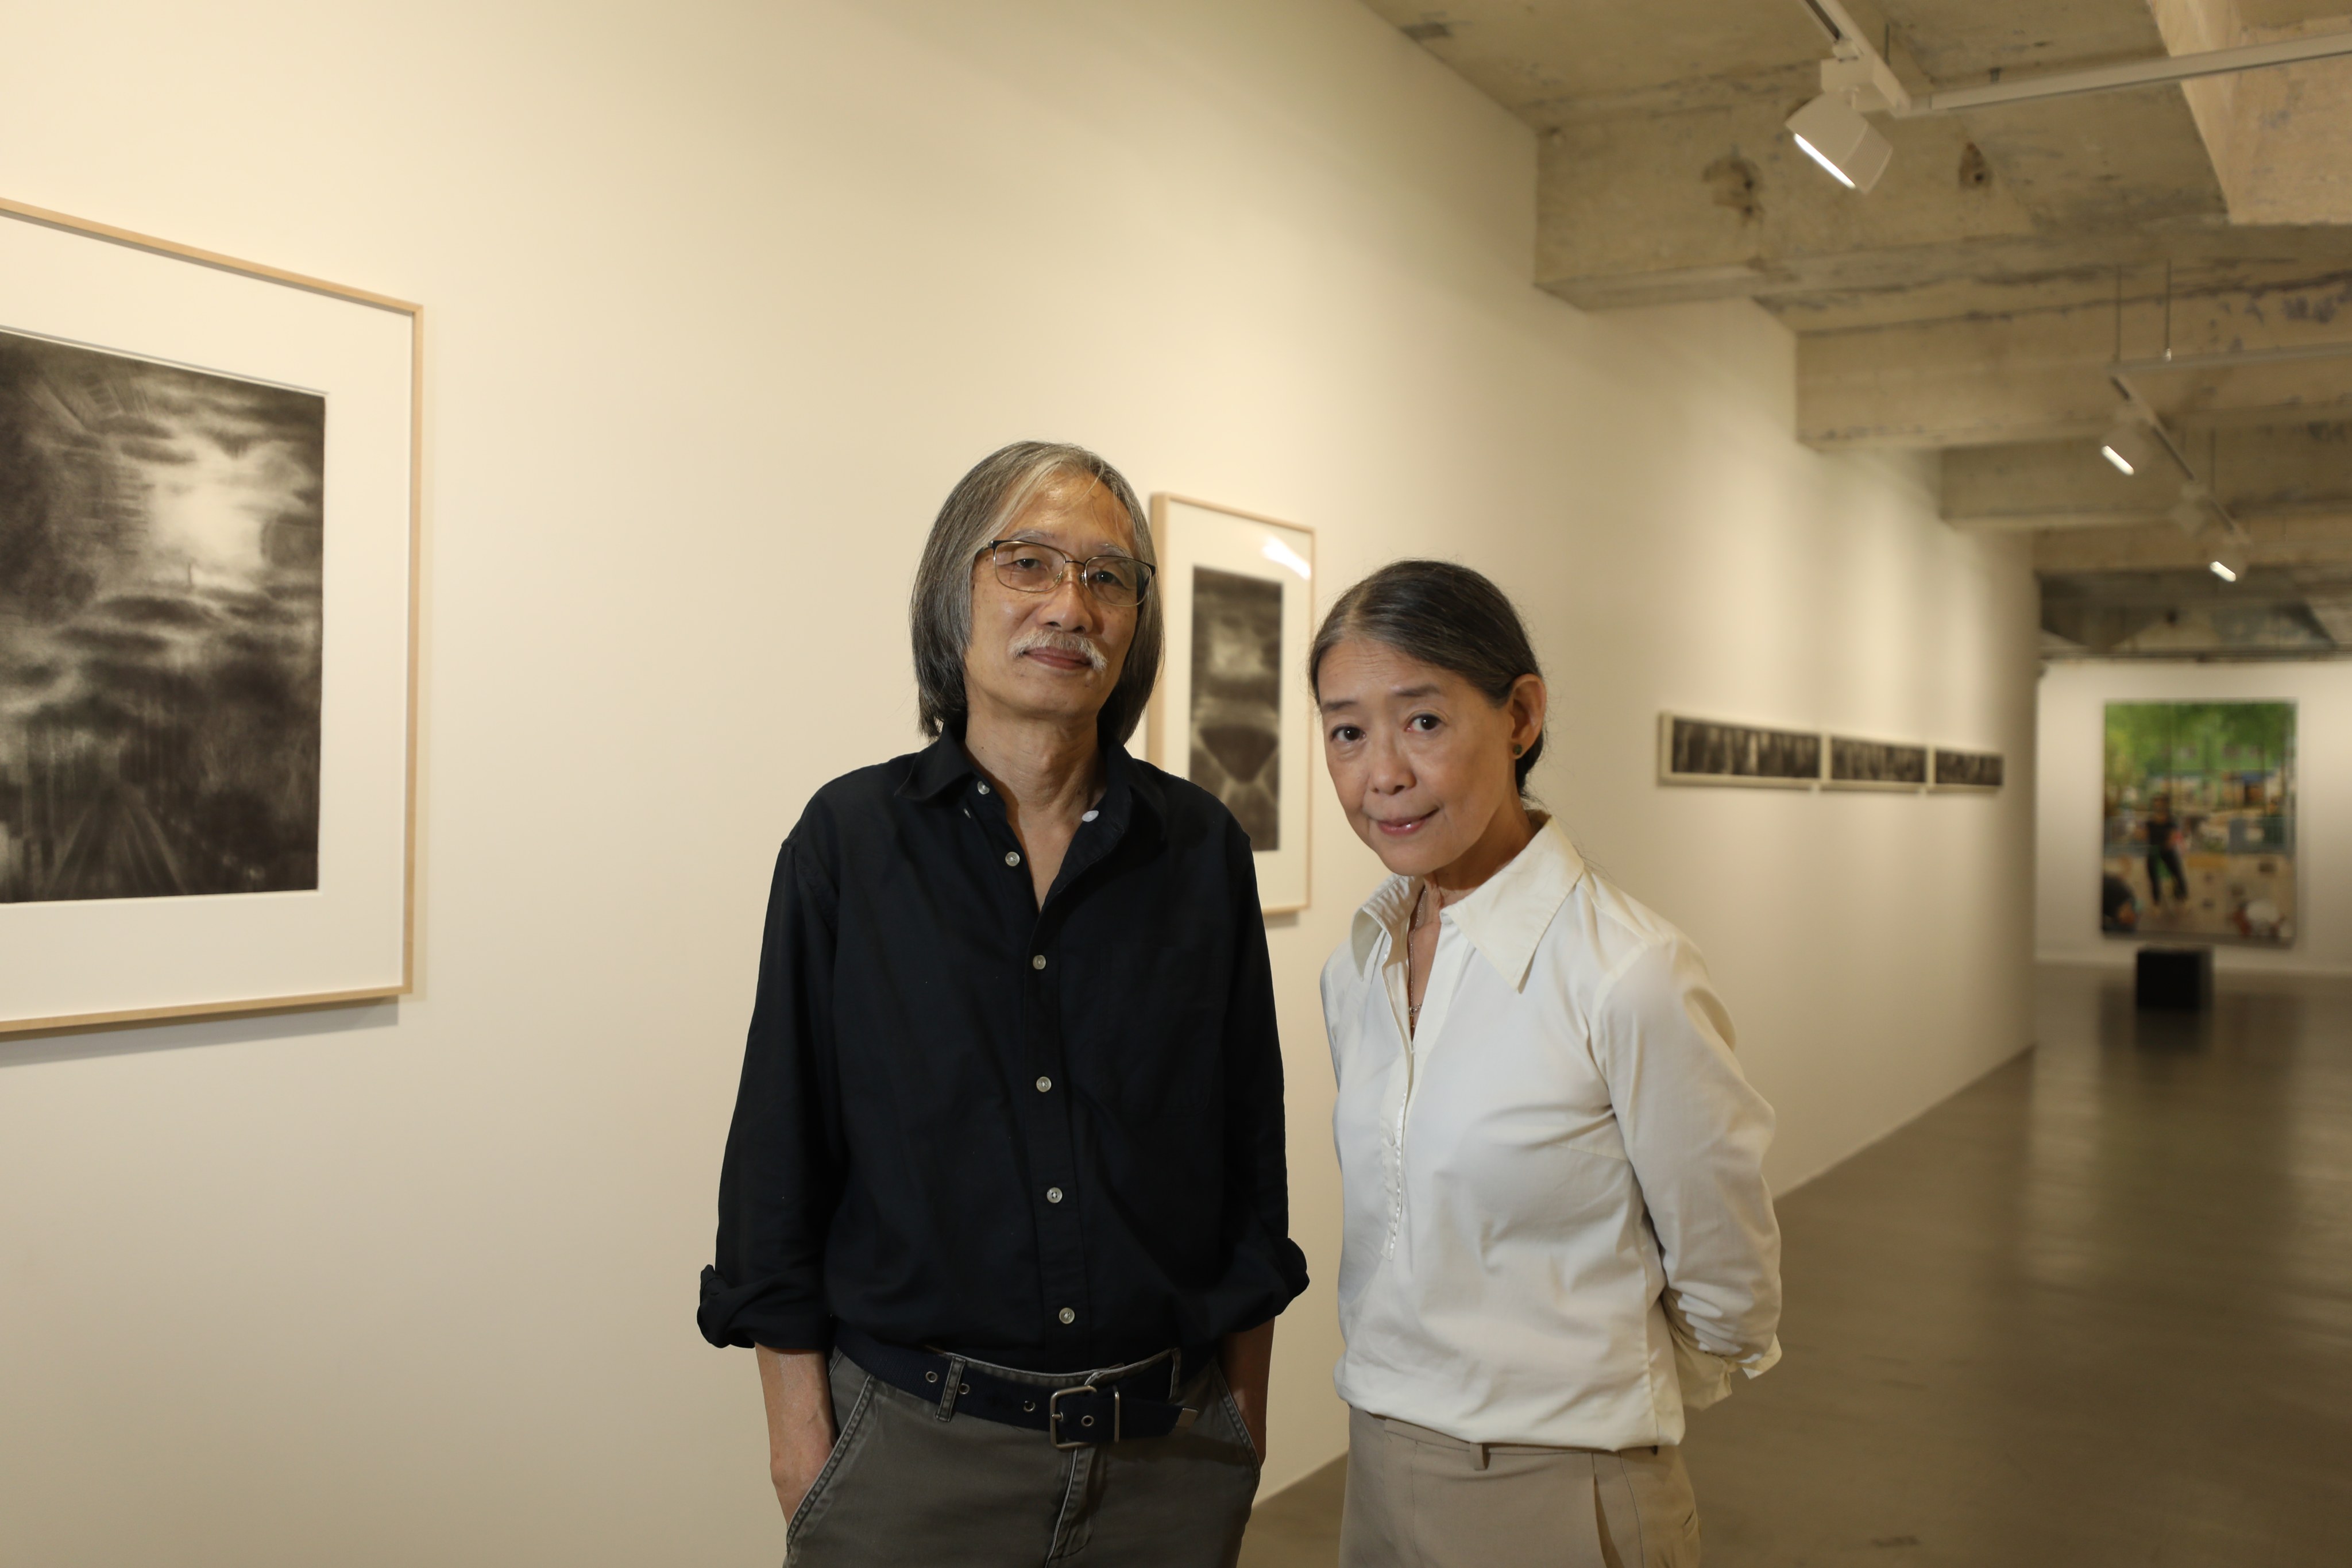 Husband and wife Yeung Tong Lung and Sze Yuen are holding their second joint art show, 28 years after their first. Solo·Exhibition·Twice II: Of Seeing, at Blindspot Gallery in Hong Kong, shows their contrasting styles. Photo: Xiaomei Chen